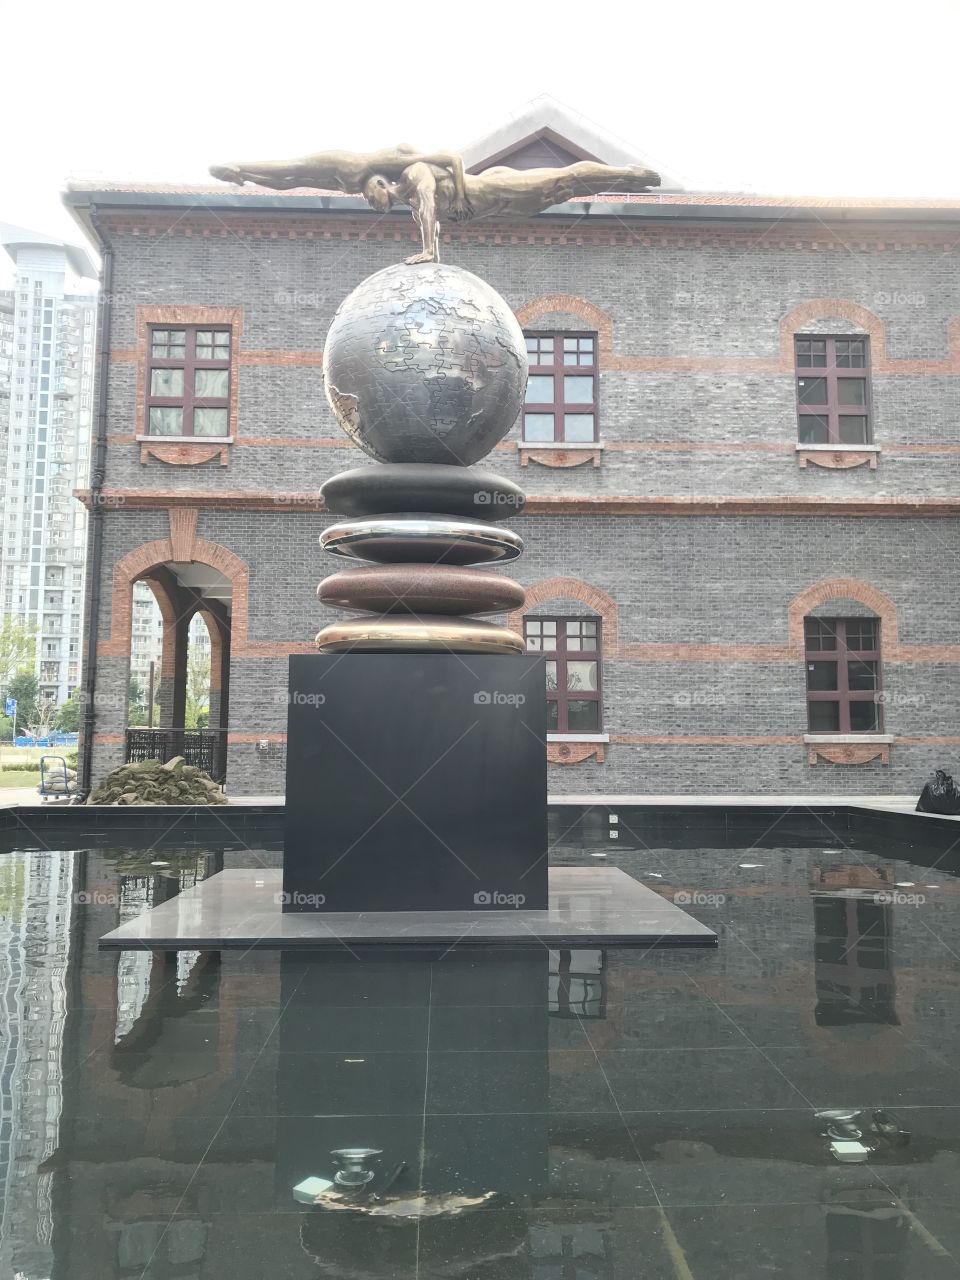 Art and architecture around Shanghai - this one is in Jing’An district (the former Zhabei district part) being under gentrification 